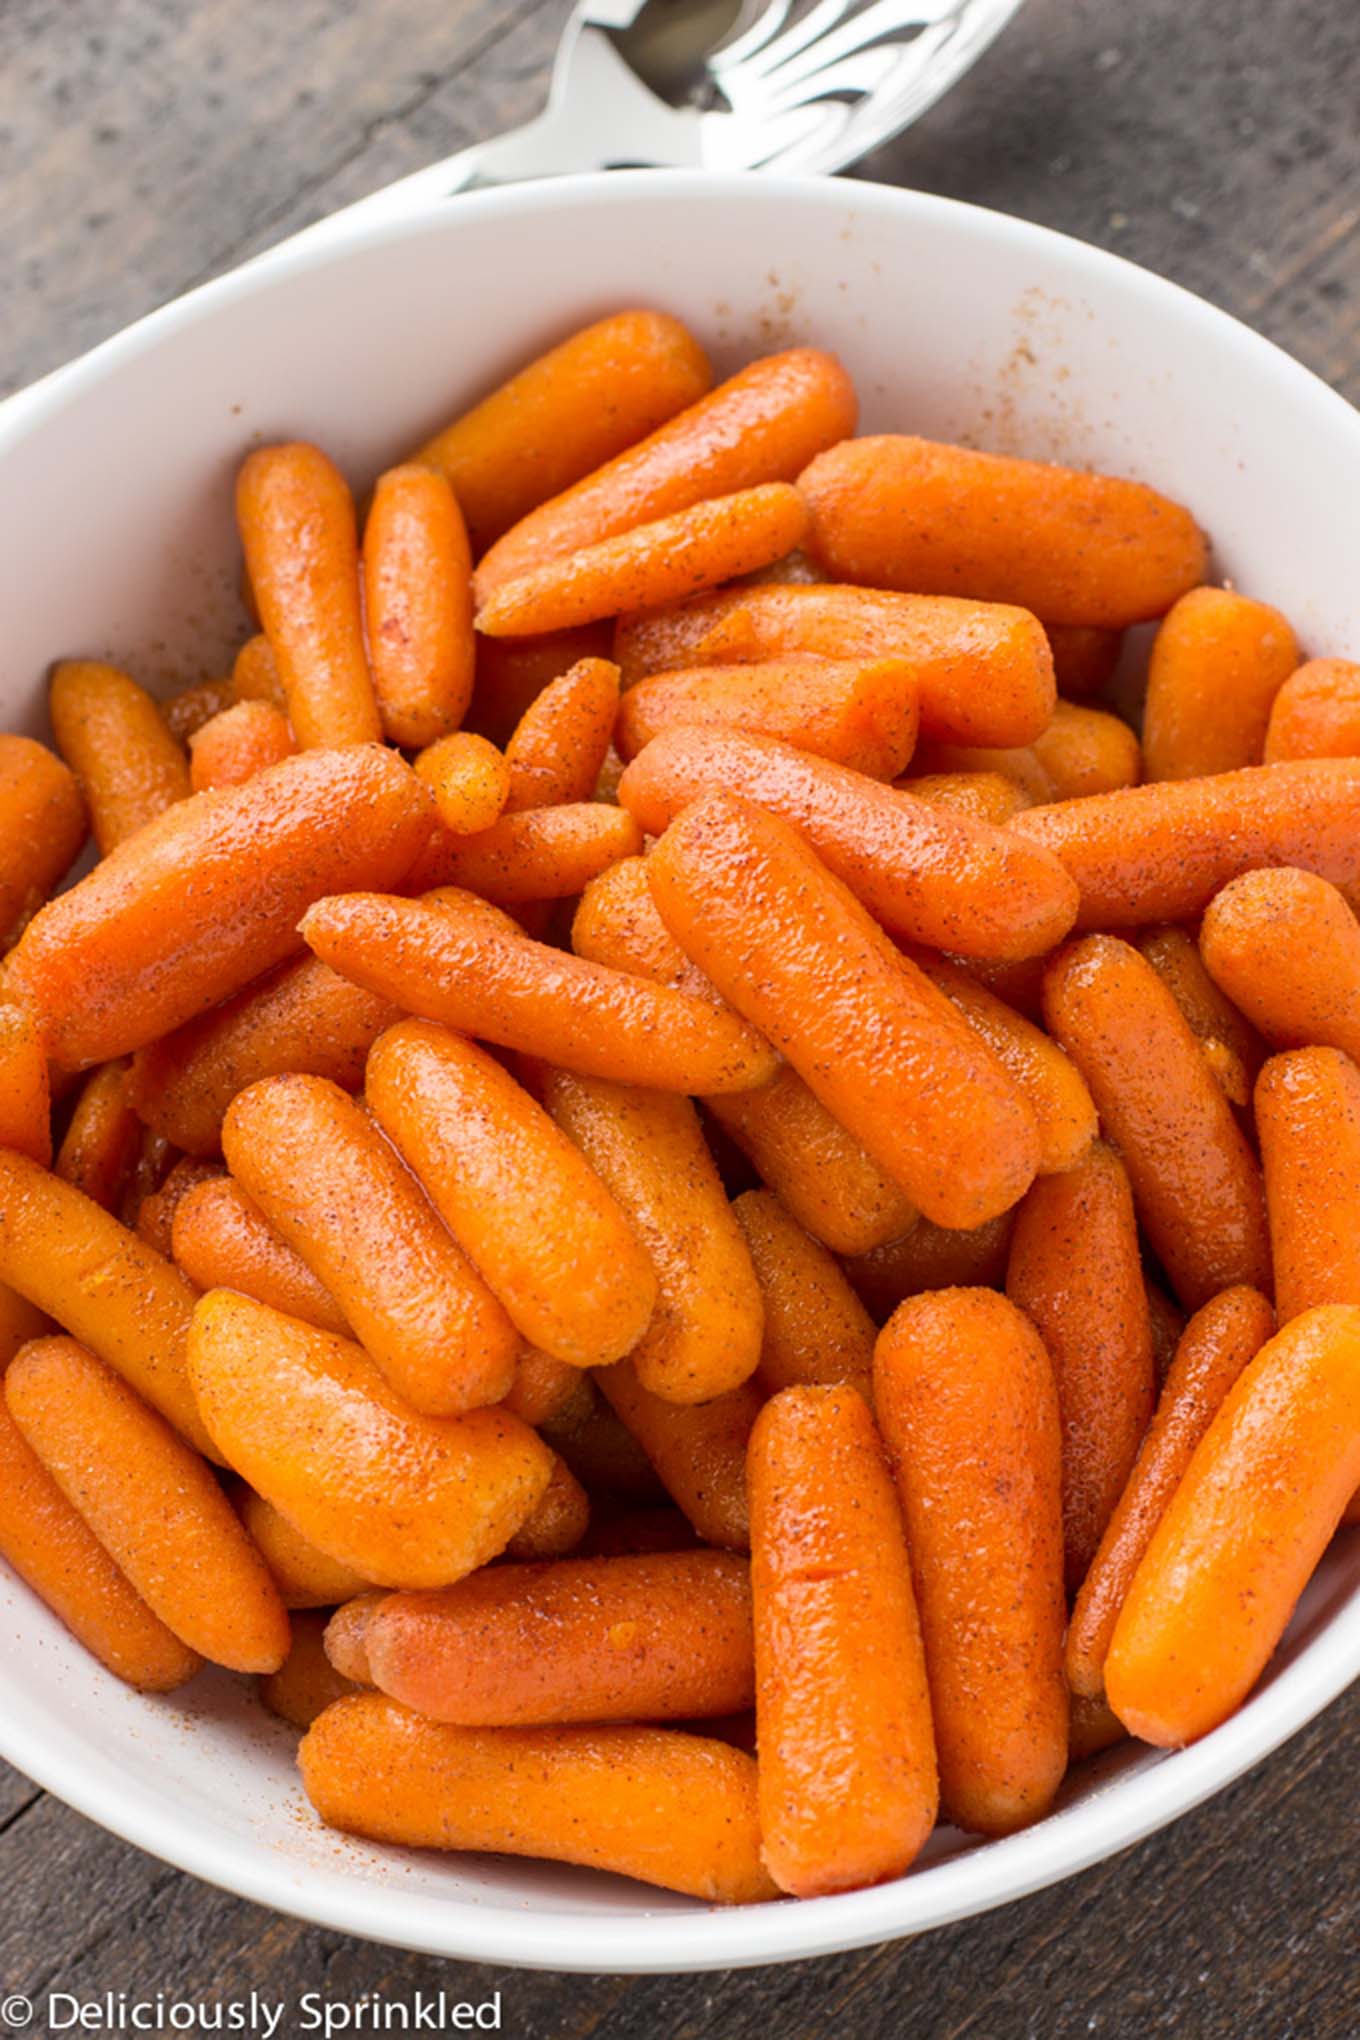 Glazed carrots in a bowl on the table ready to serve.